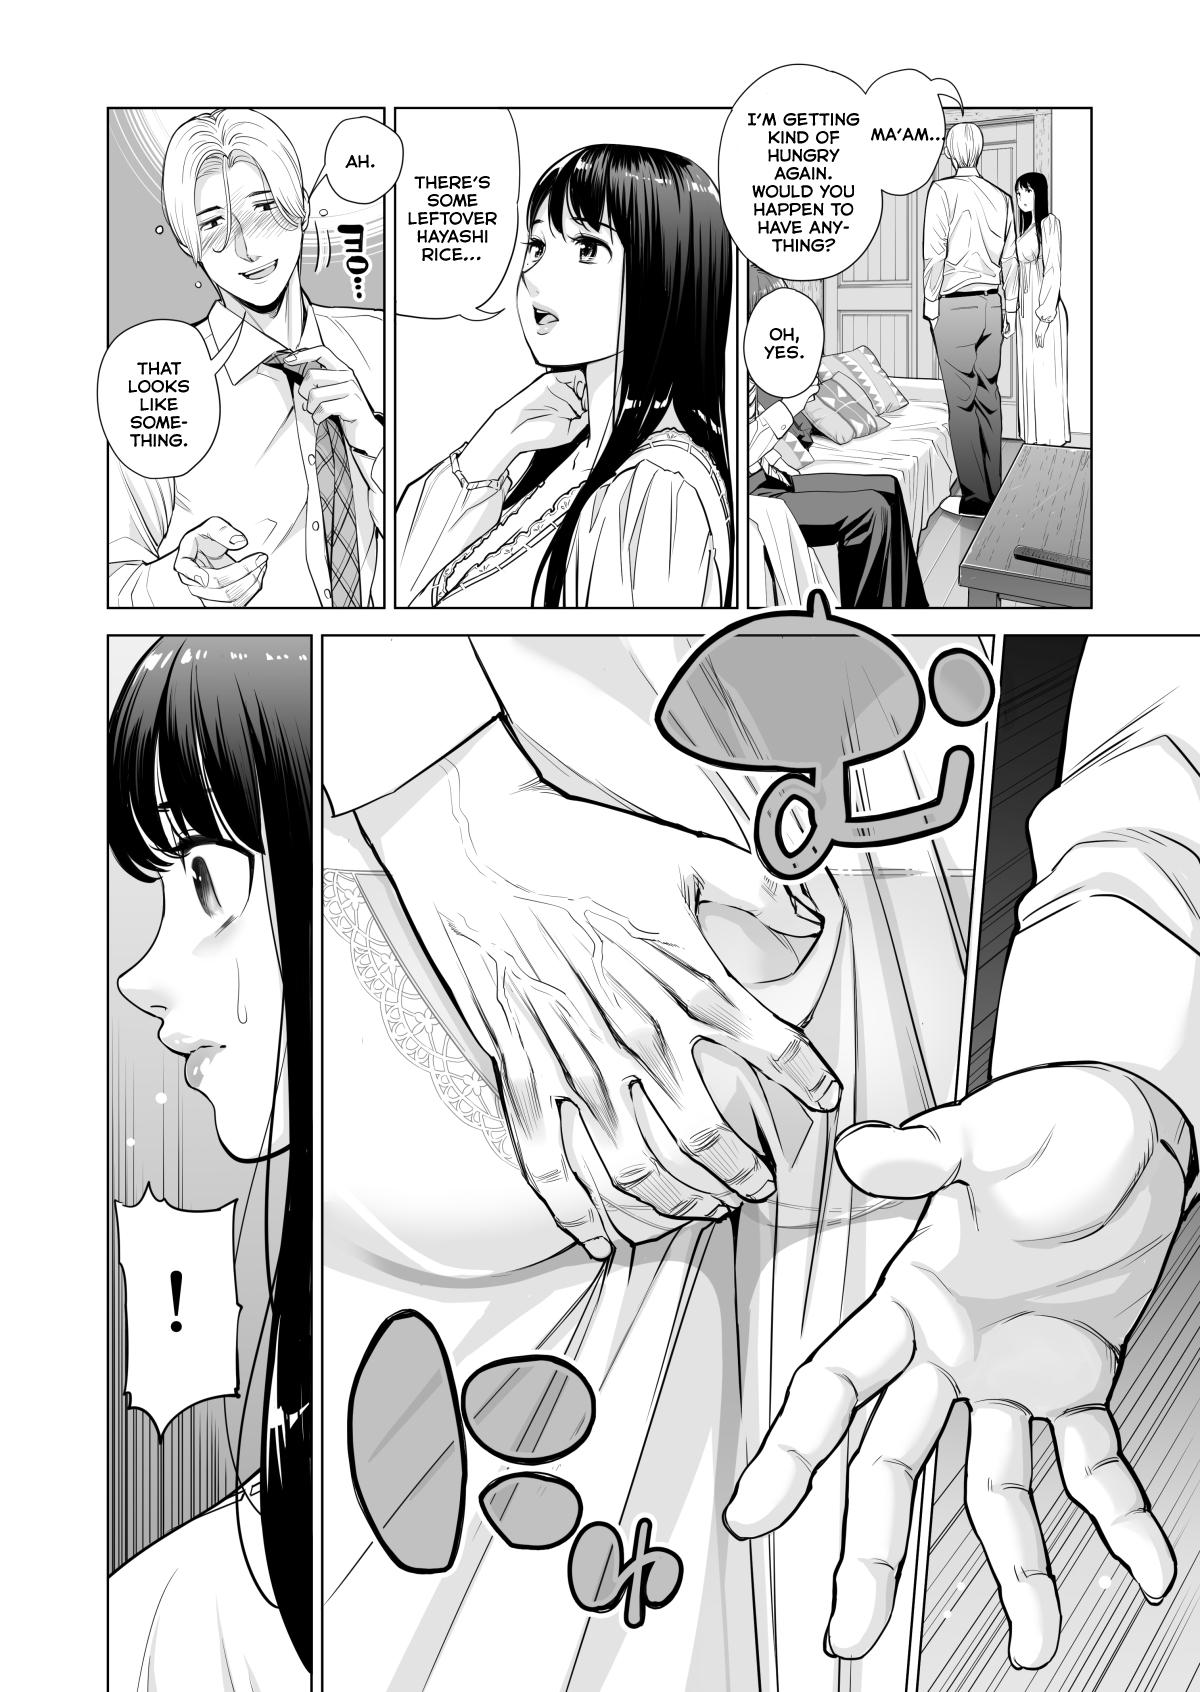 [HGT Lab (Tsusauto)] Tsukiyo no Midare Zake (Zenpen) Moonlit Intoxication ~ A Housewife Stolen by a Coworker Besides her Blackout Drunk Husband ~ Chapter 1 [English] 16